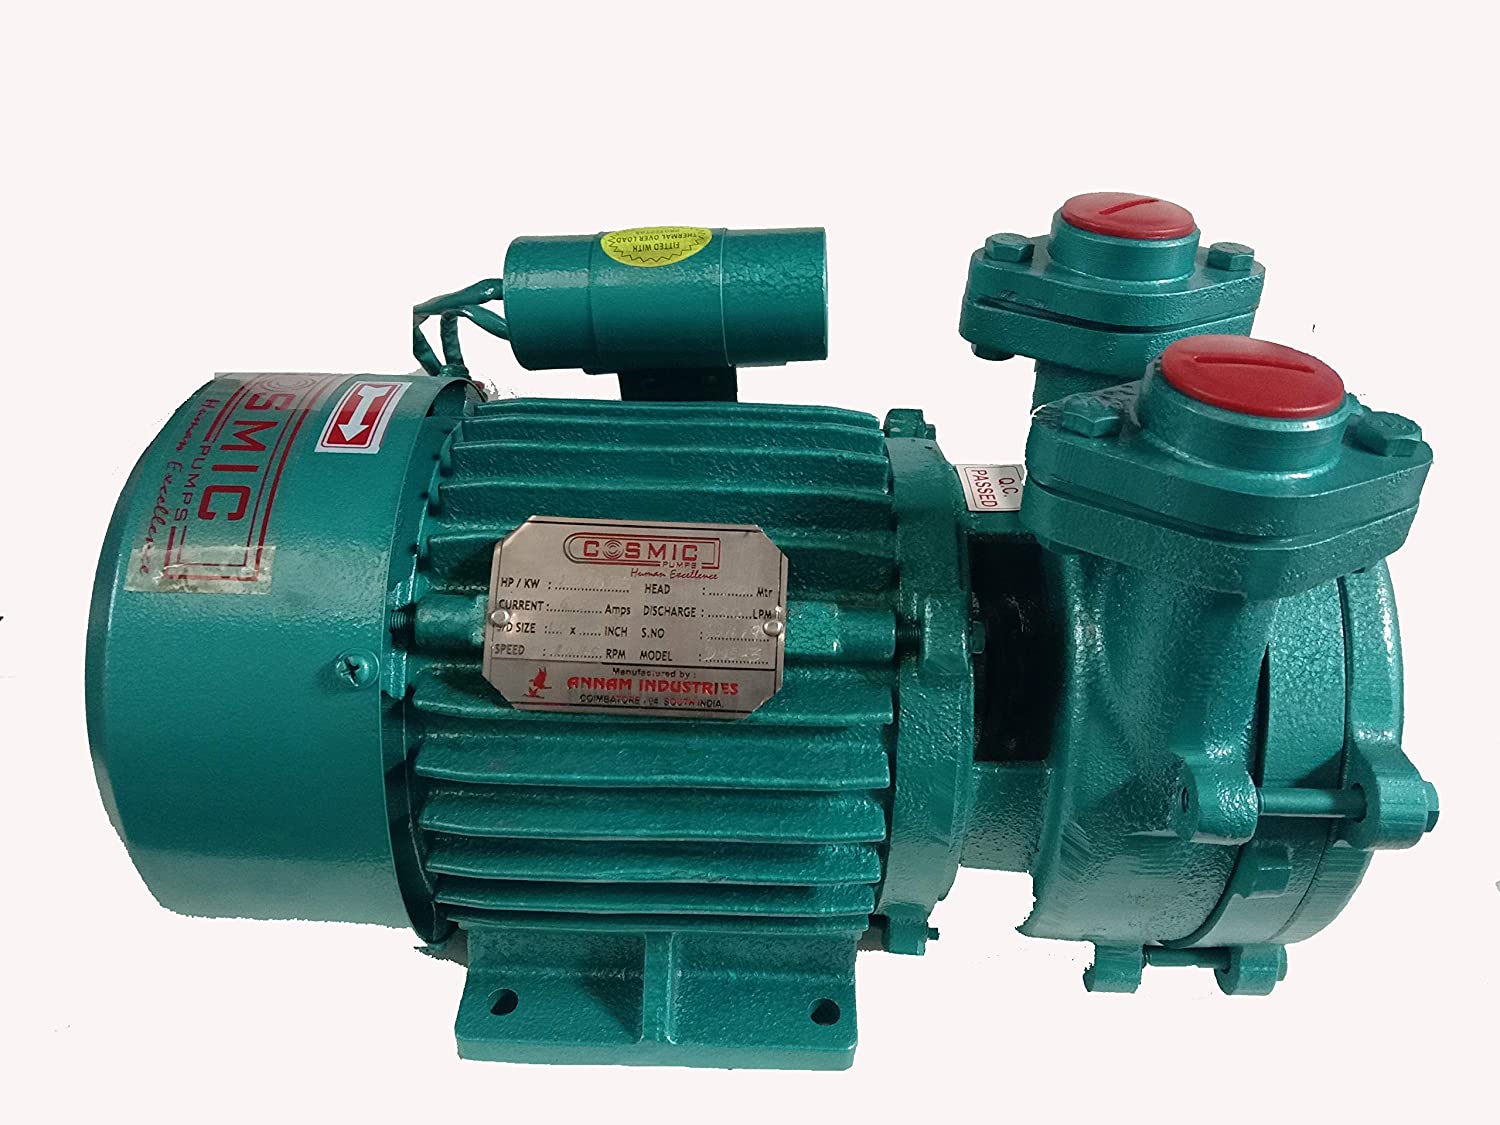 Cosmic 0.5hp best water pump for home use